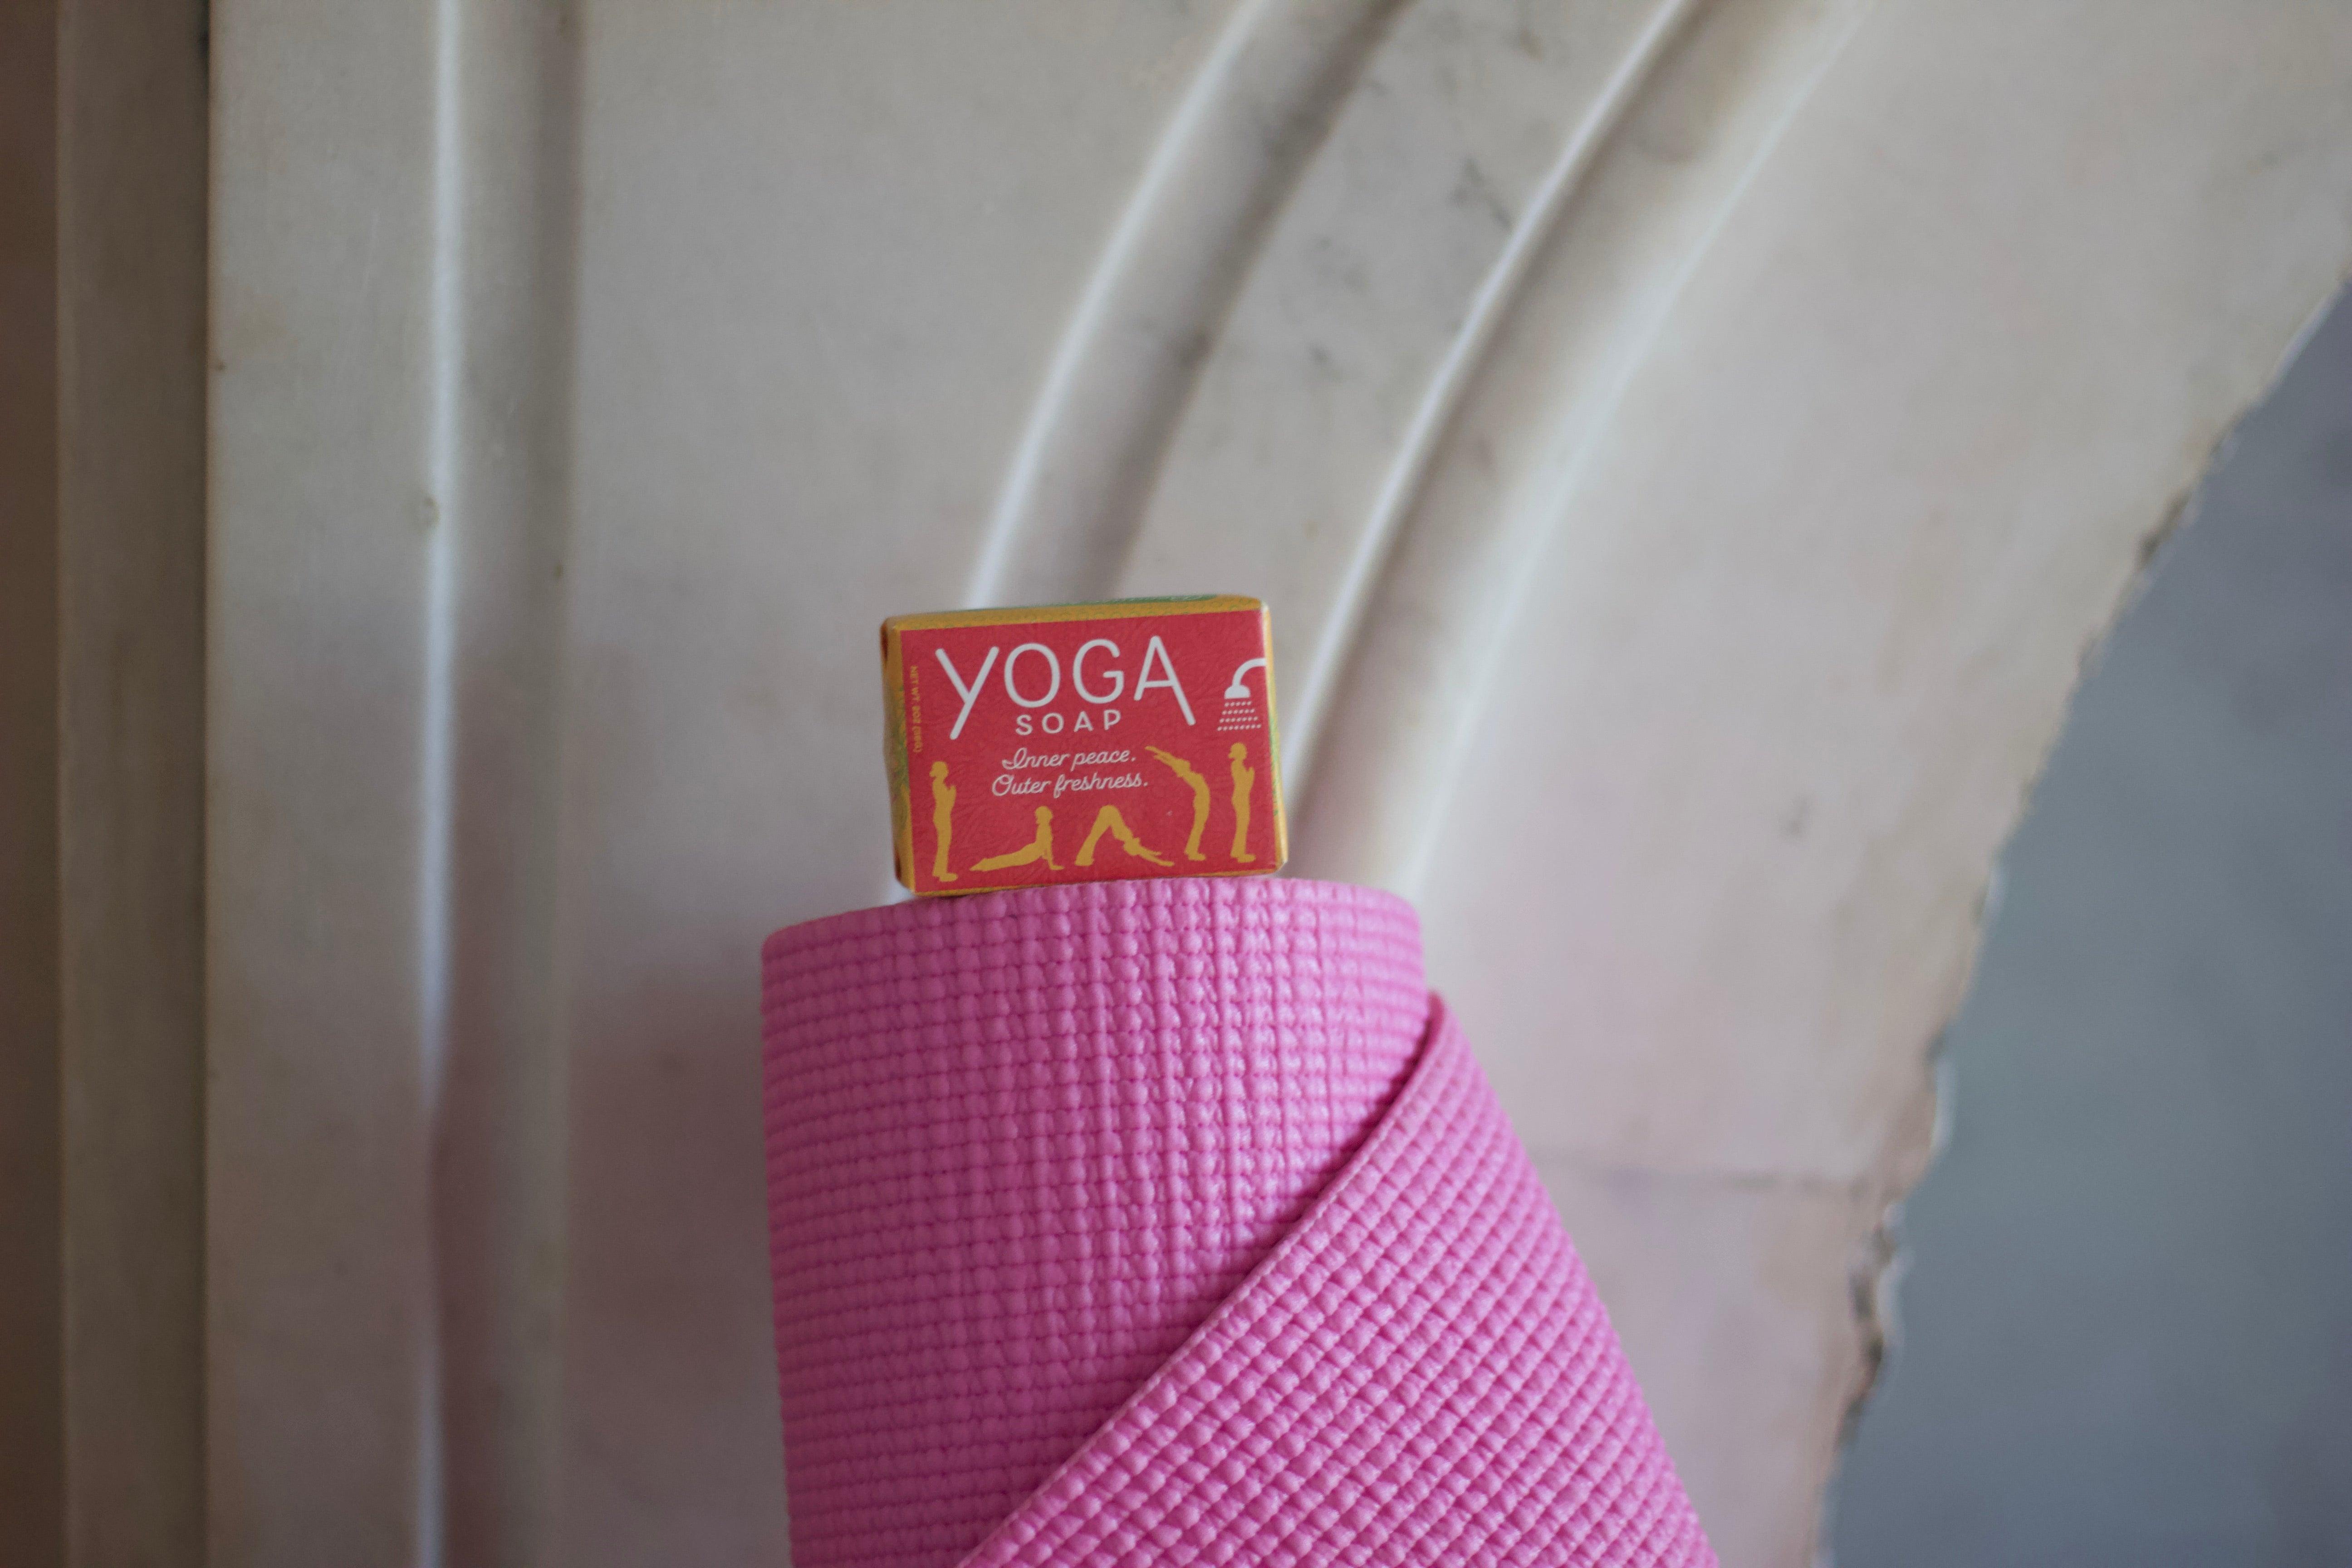 Product photo of Yoga Soap, a novelty gift manufactured by The Unemployed Philosophers Guild.